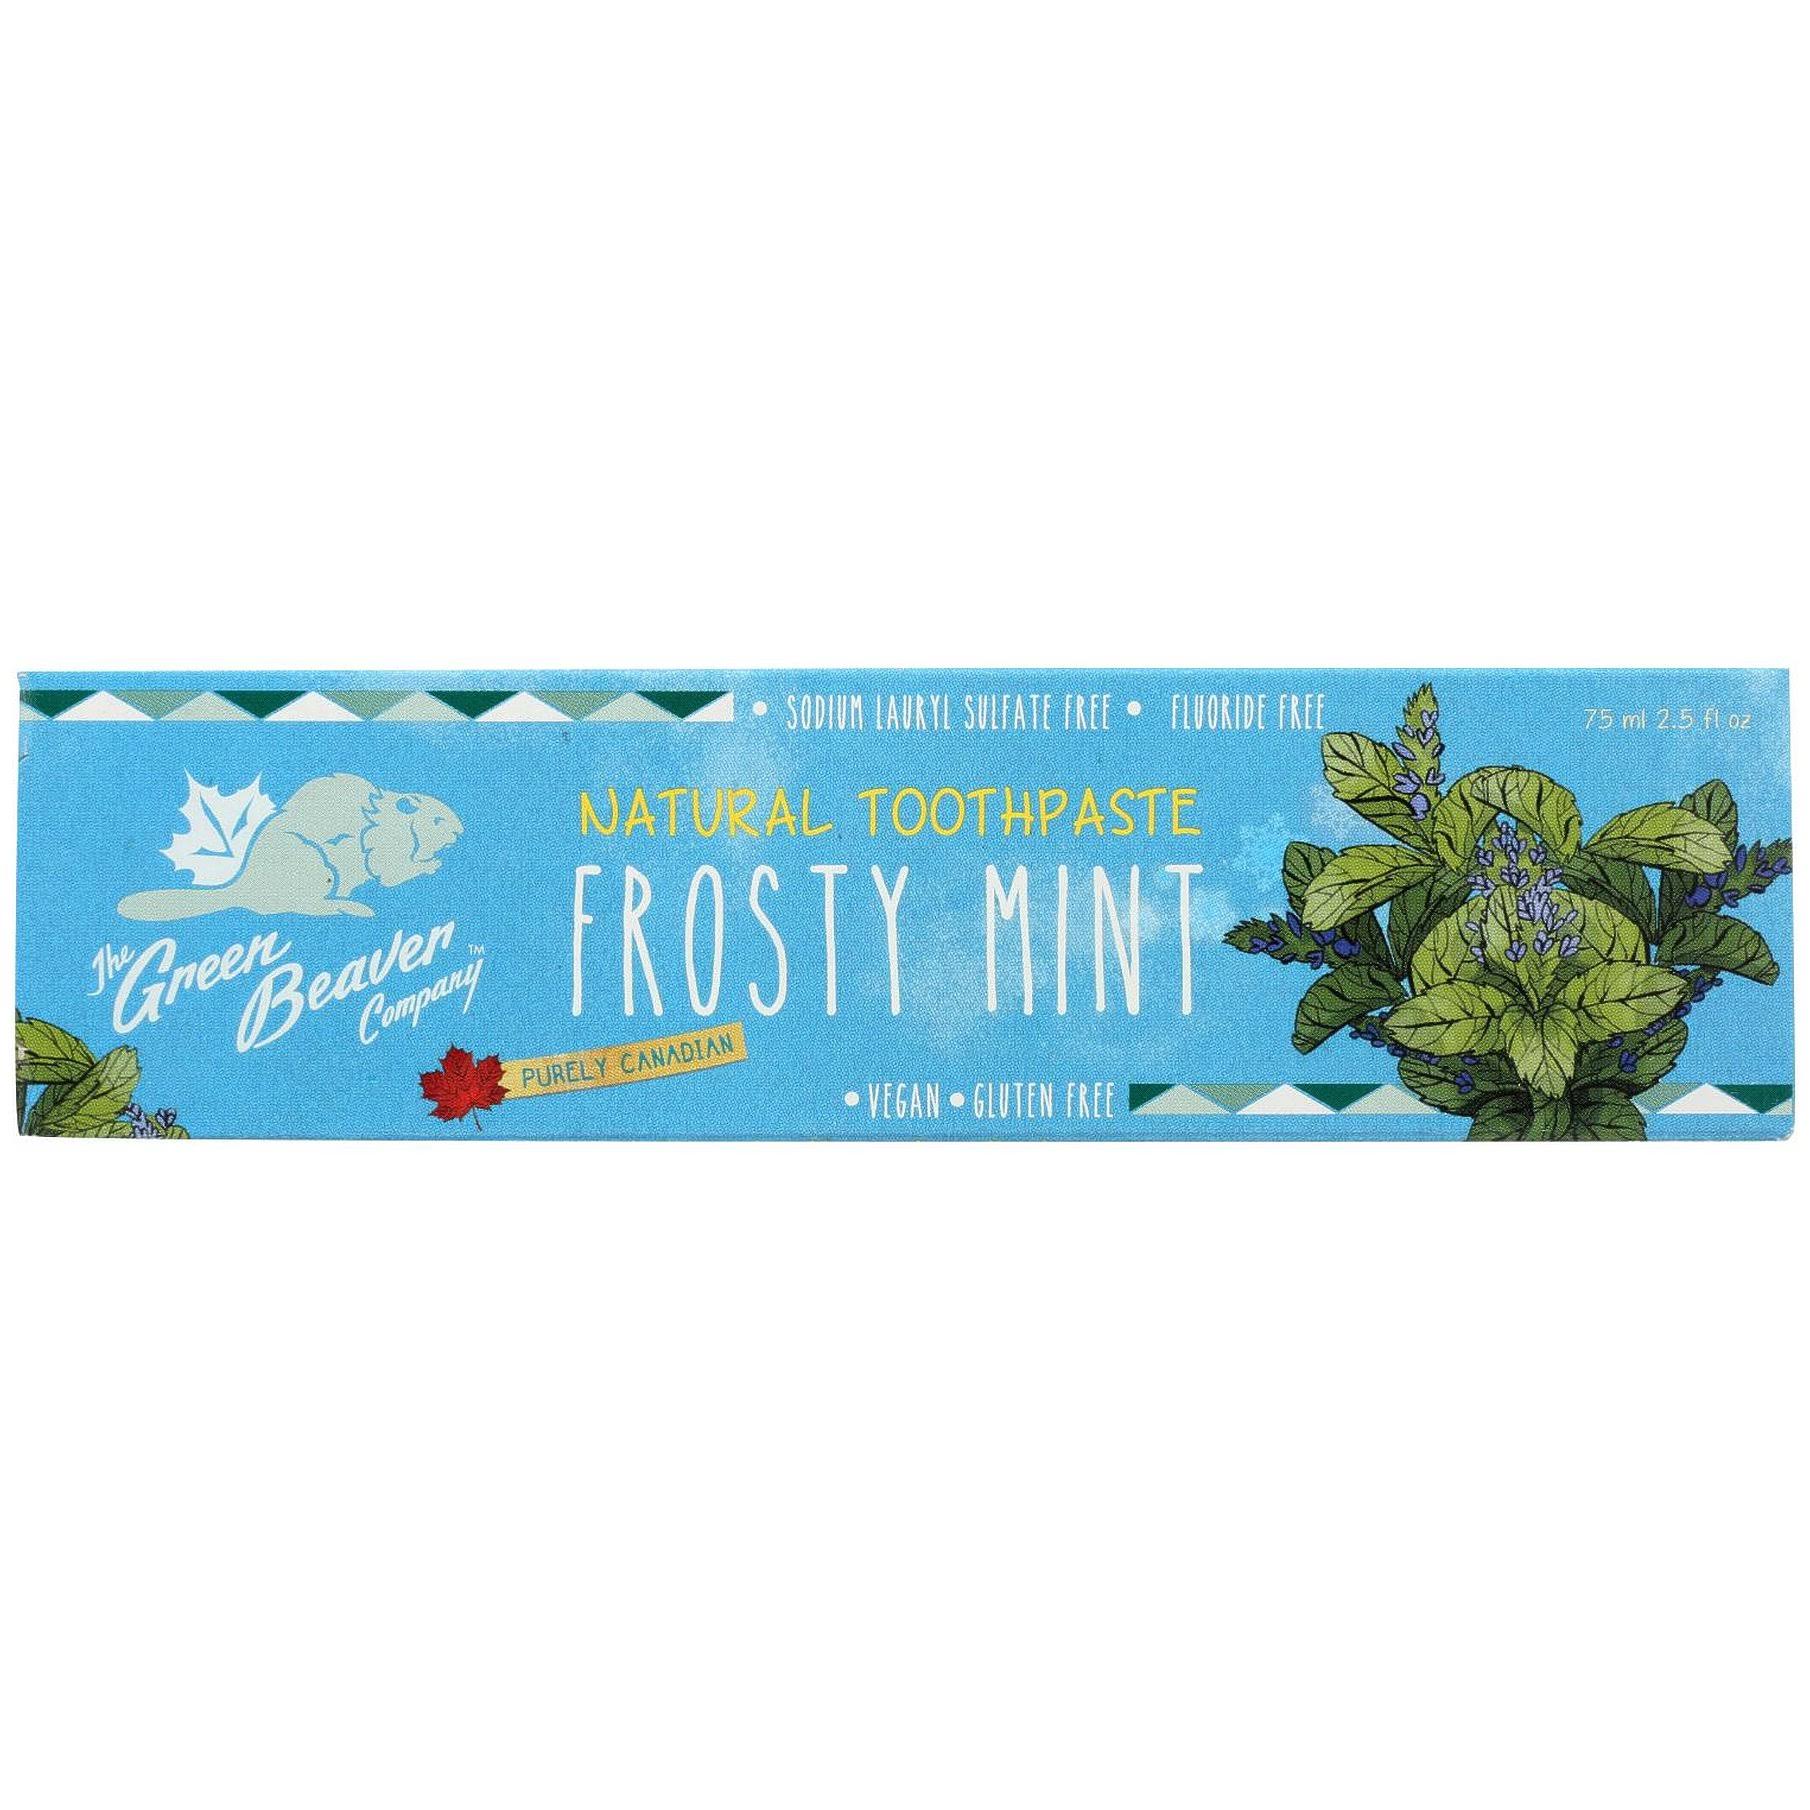 Green Beaver Natural Toothpaste - Frosty Mint, 2.5oz